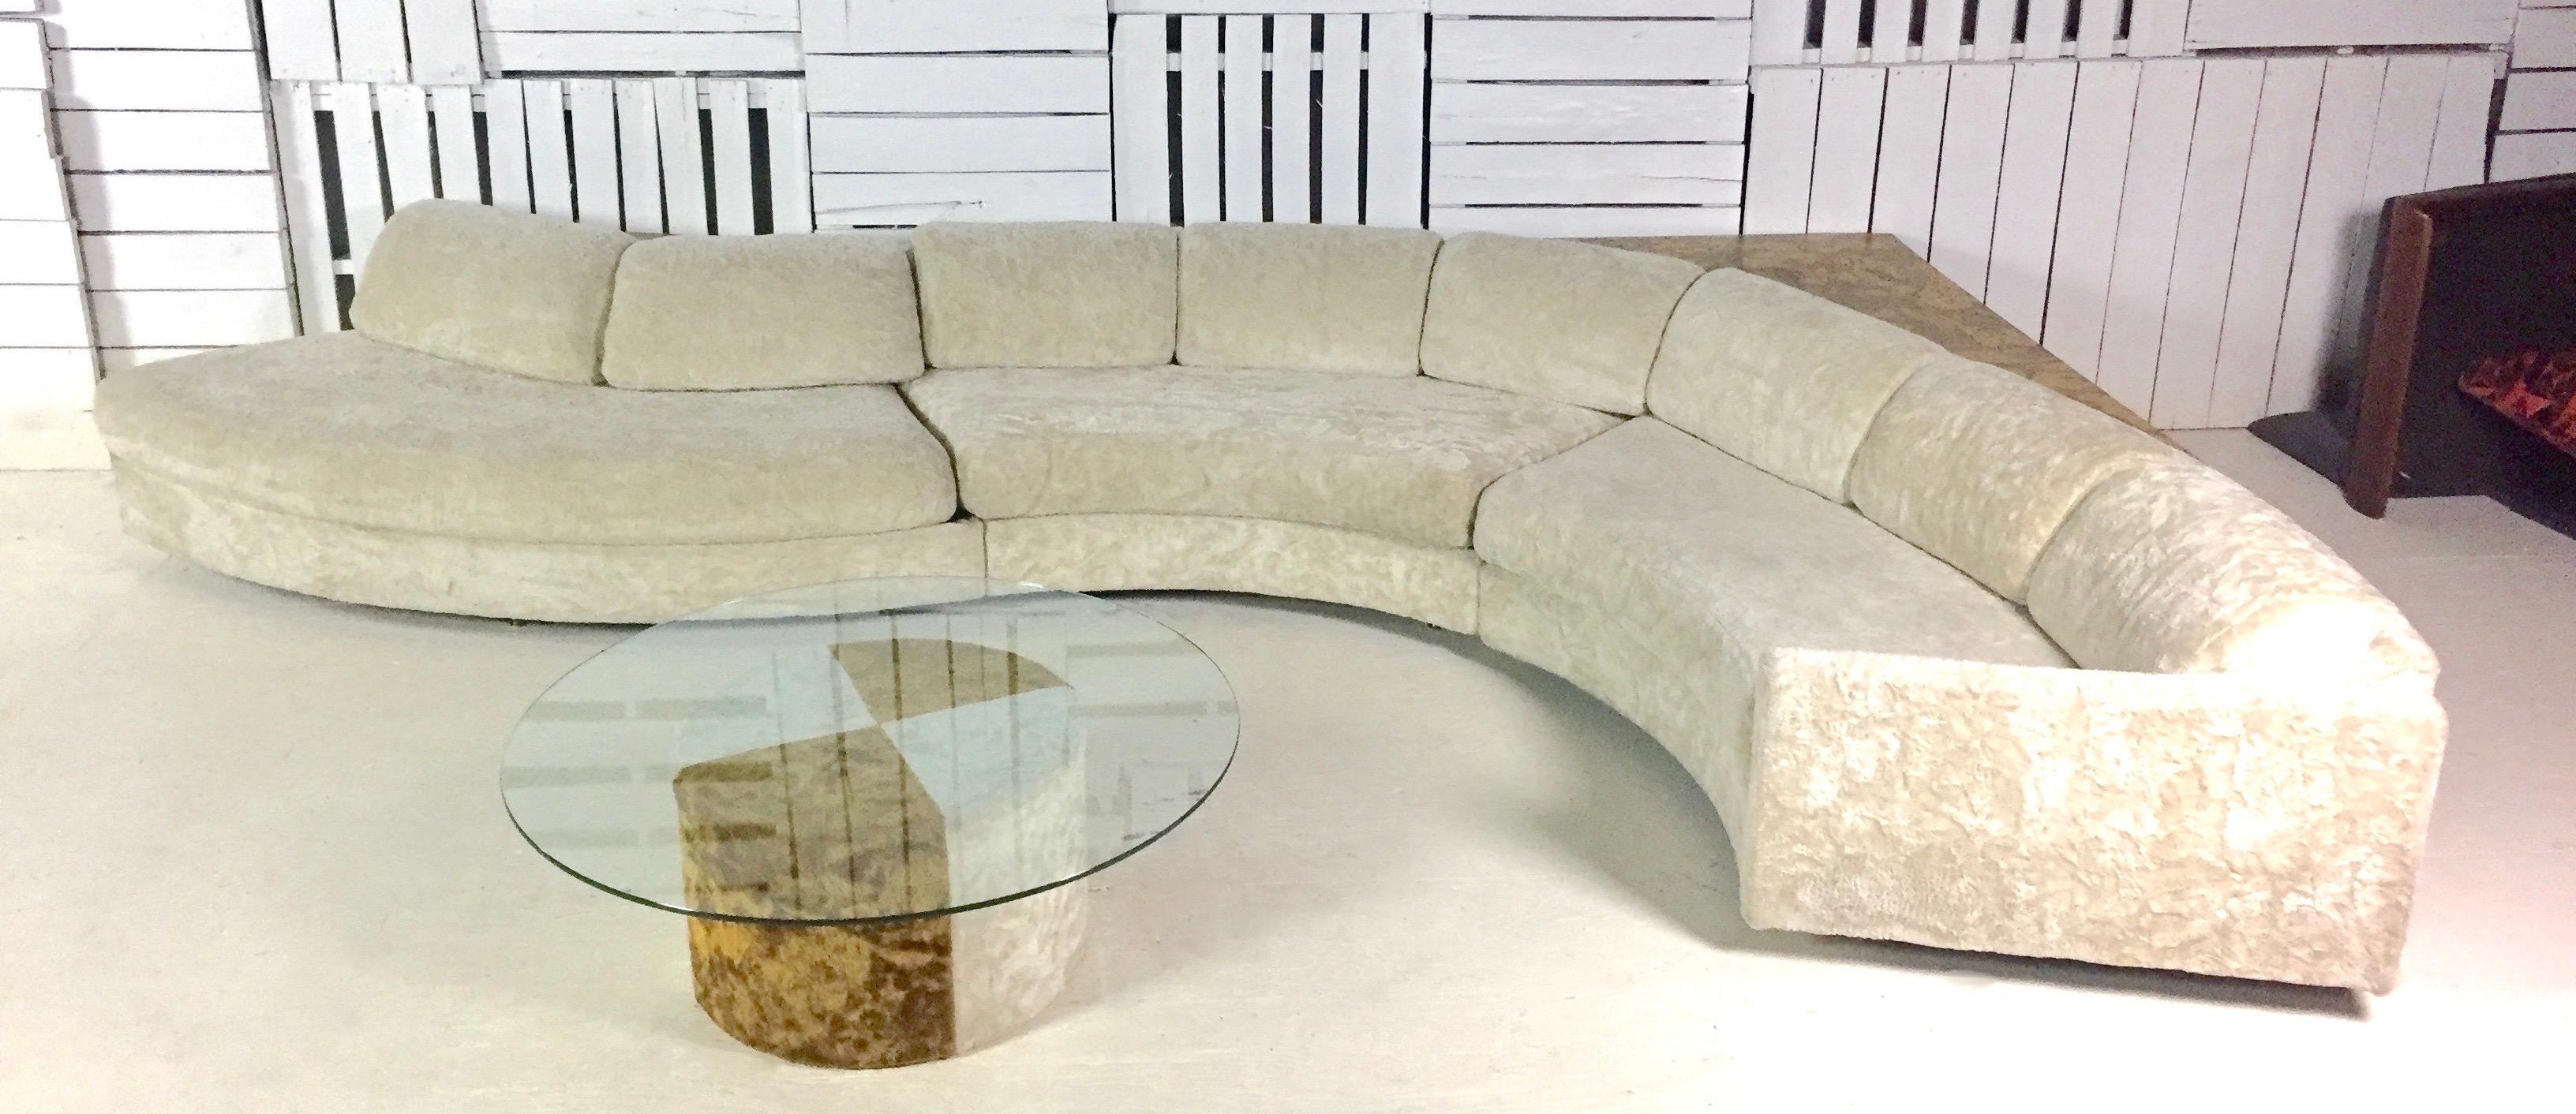 Authentic Adrian Pearsall sectionals are some of his most dramatic creations. They also need space! Please peruse our growing collection of rare Pearsall pieces which we will be listing this month.

Adrian Pearsall three-piece serpentine sectional